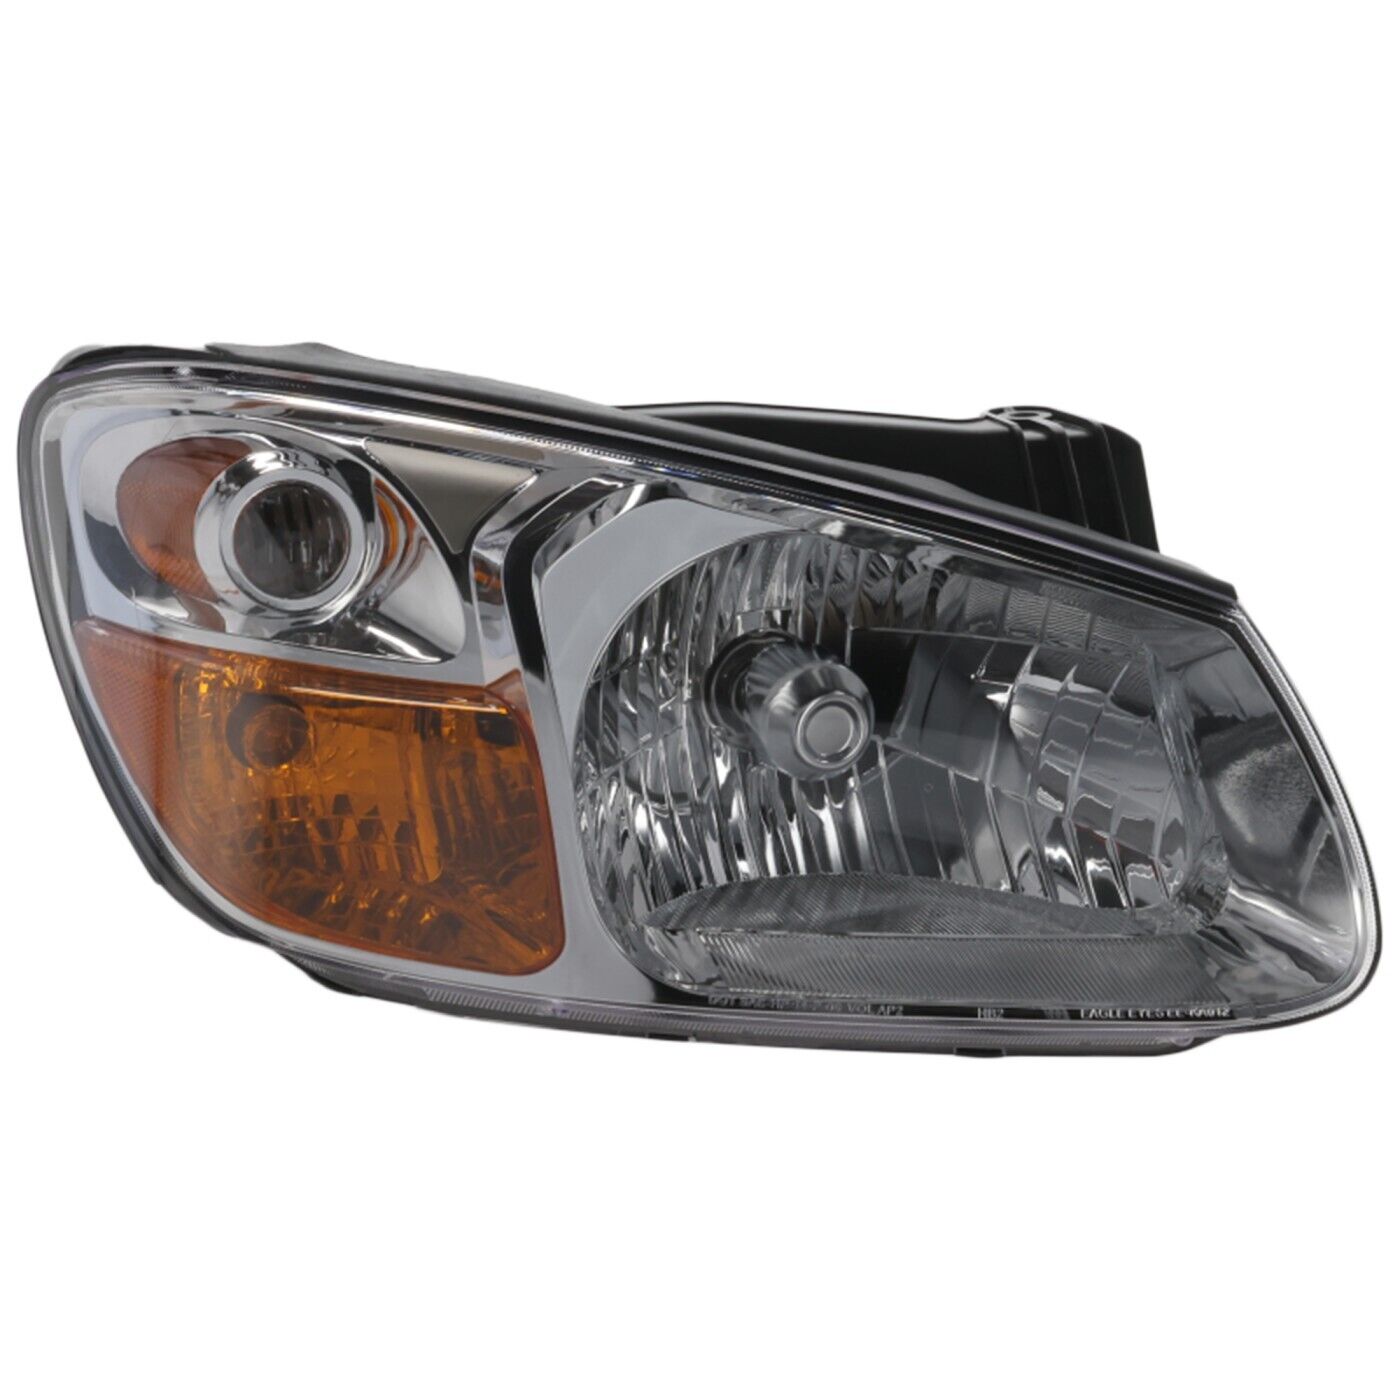 Headlight For 2007 2008 2009 Kia Spectra Right Clear Lens With Bulb